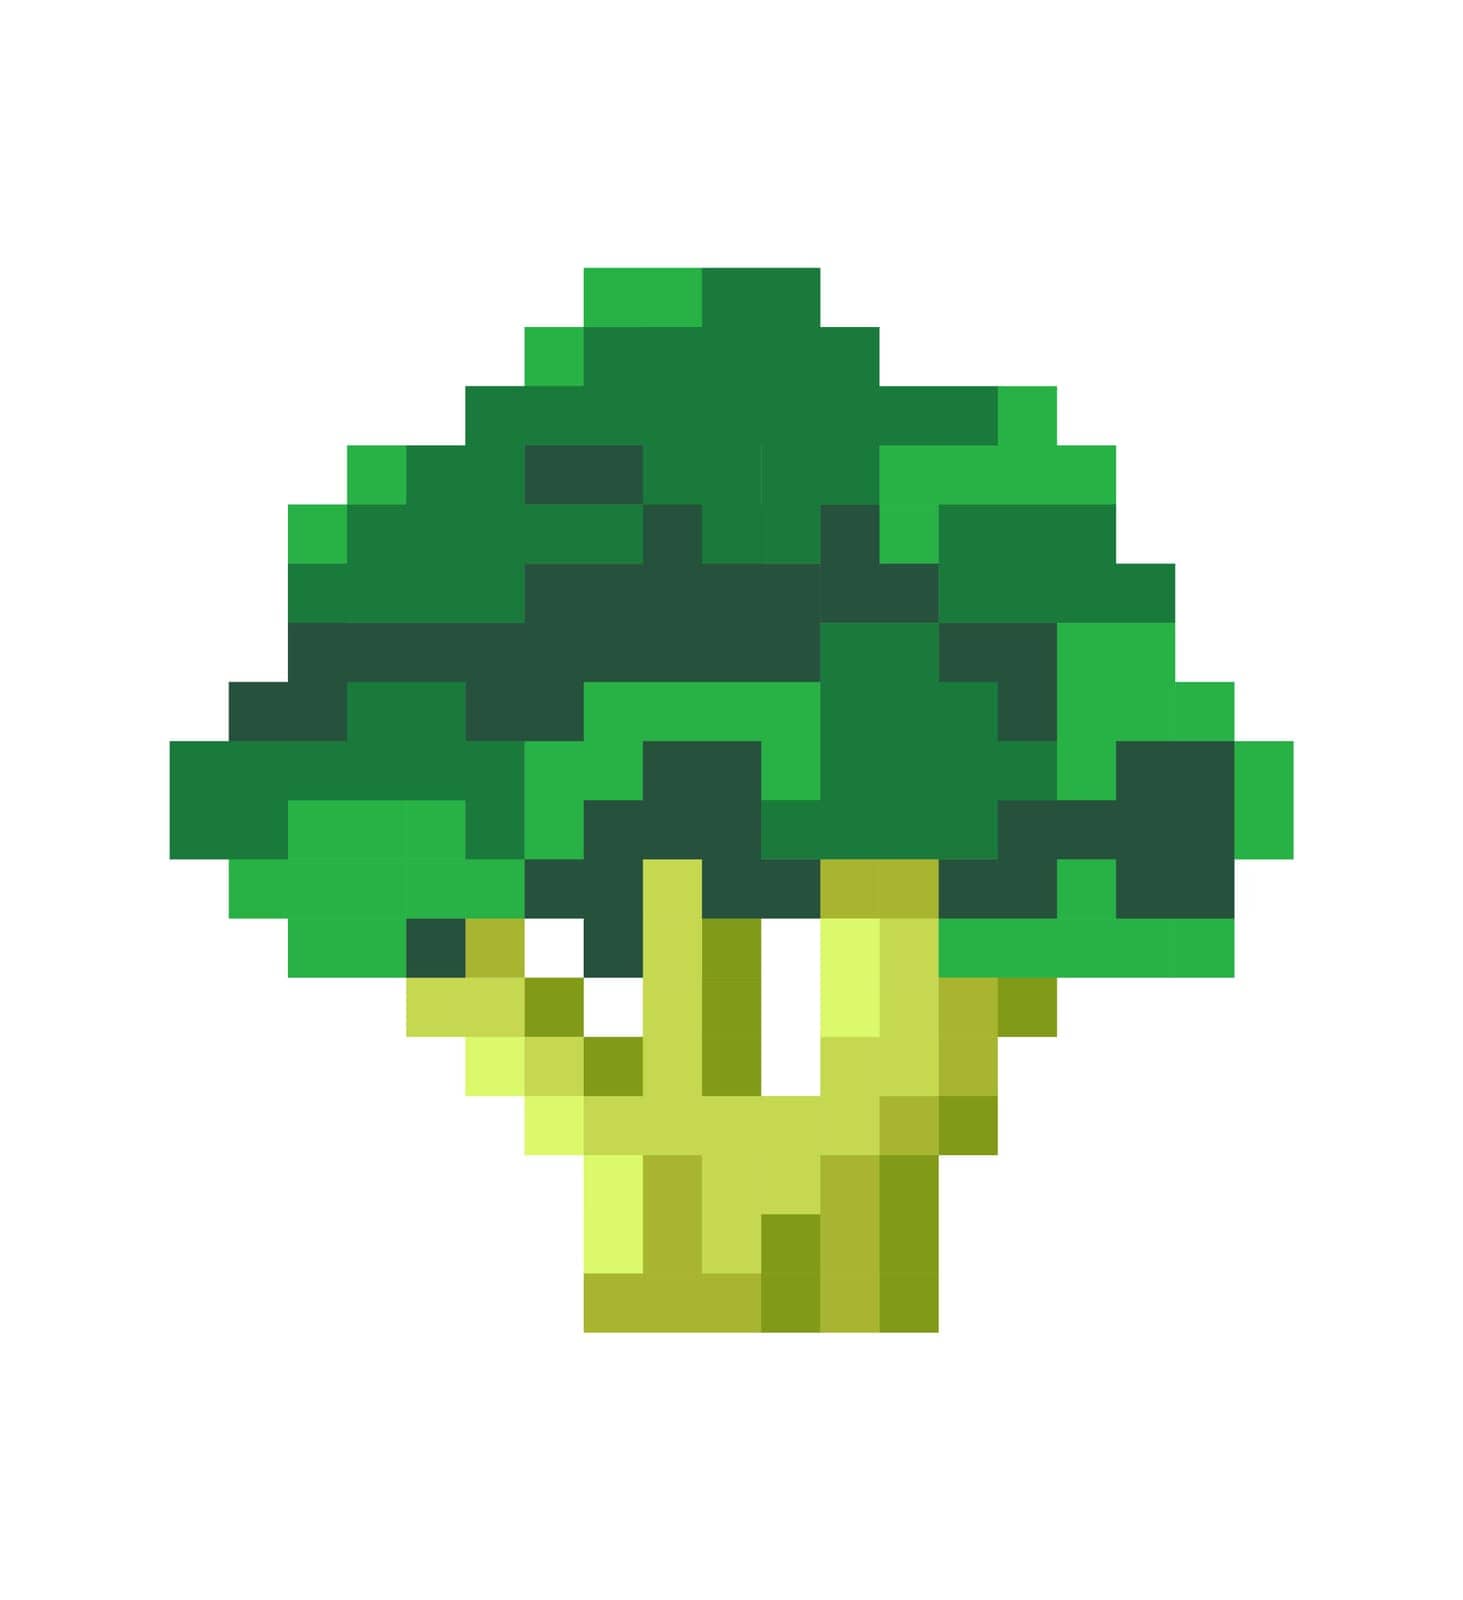 Broccoli pixel art, sign of vegetable, veggies and healthy eating. Food and organic nourishment, nutrition and tasty green meal. Pixelated isolated icon, 8 bit game design, Vector in flat style